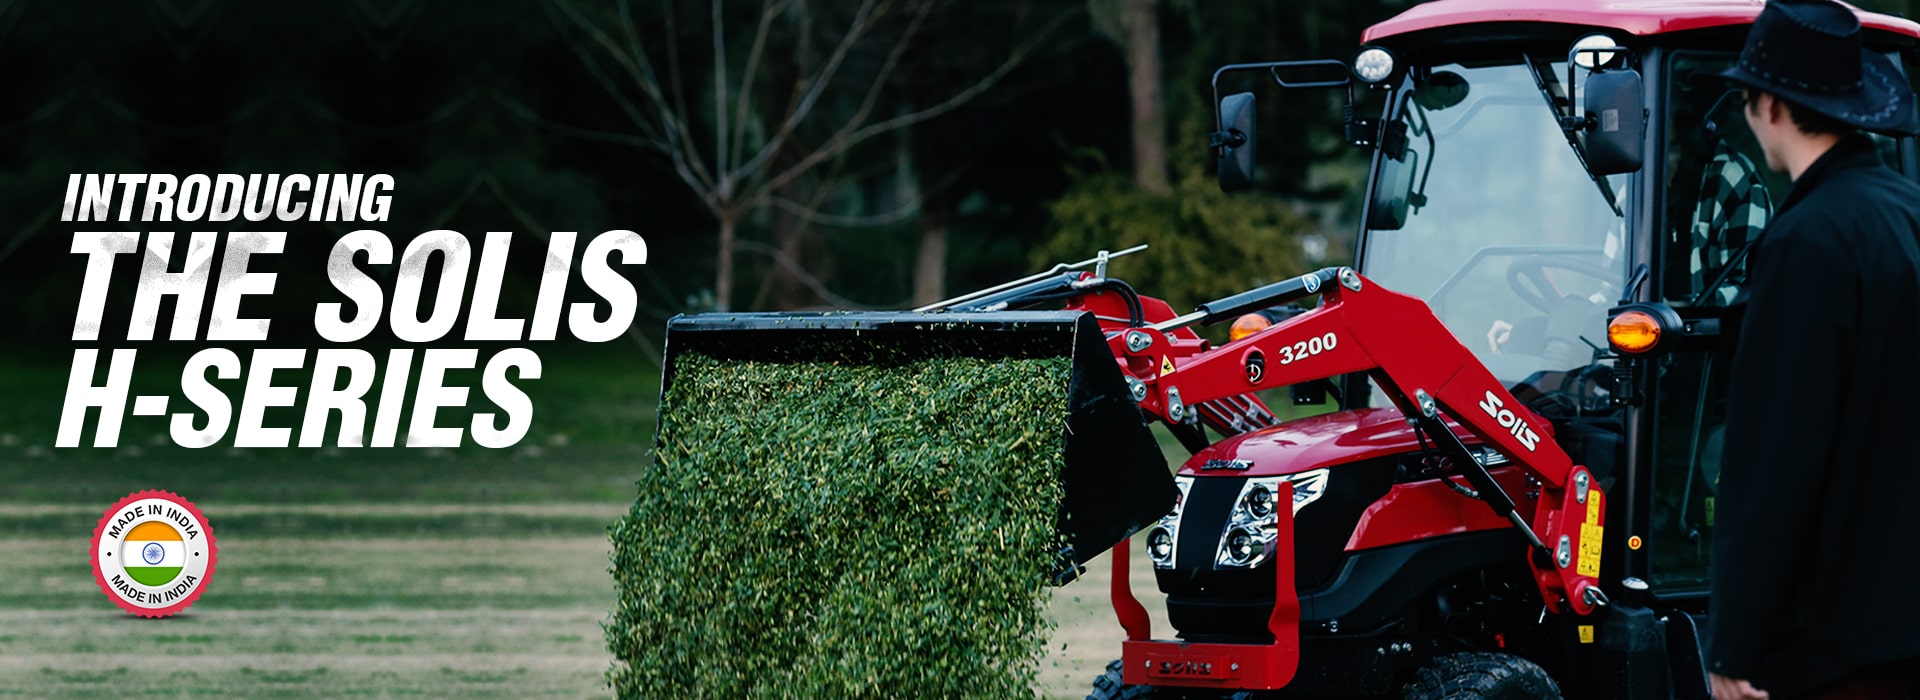 Introducing the Solis H Series: The Heavy-Duty Tractor Built for Your Toughest hobby Farming Tasks